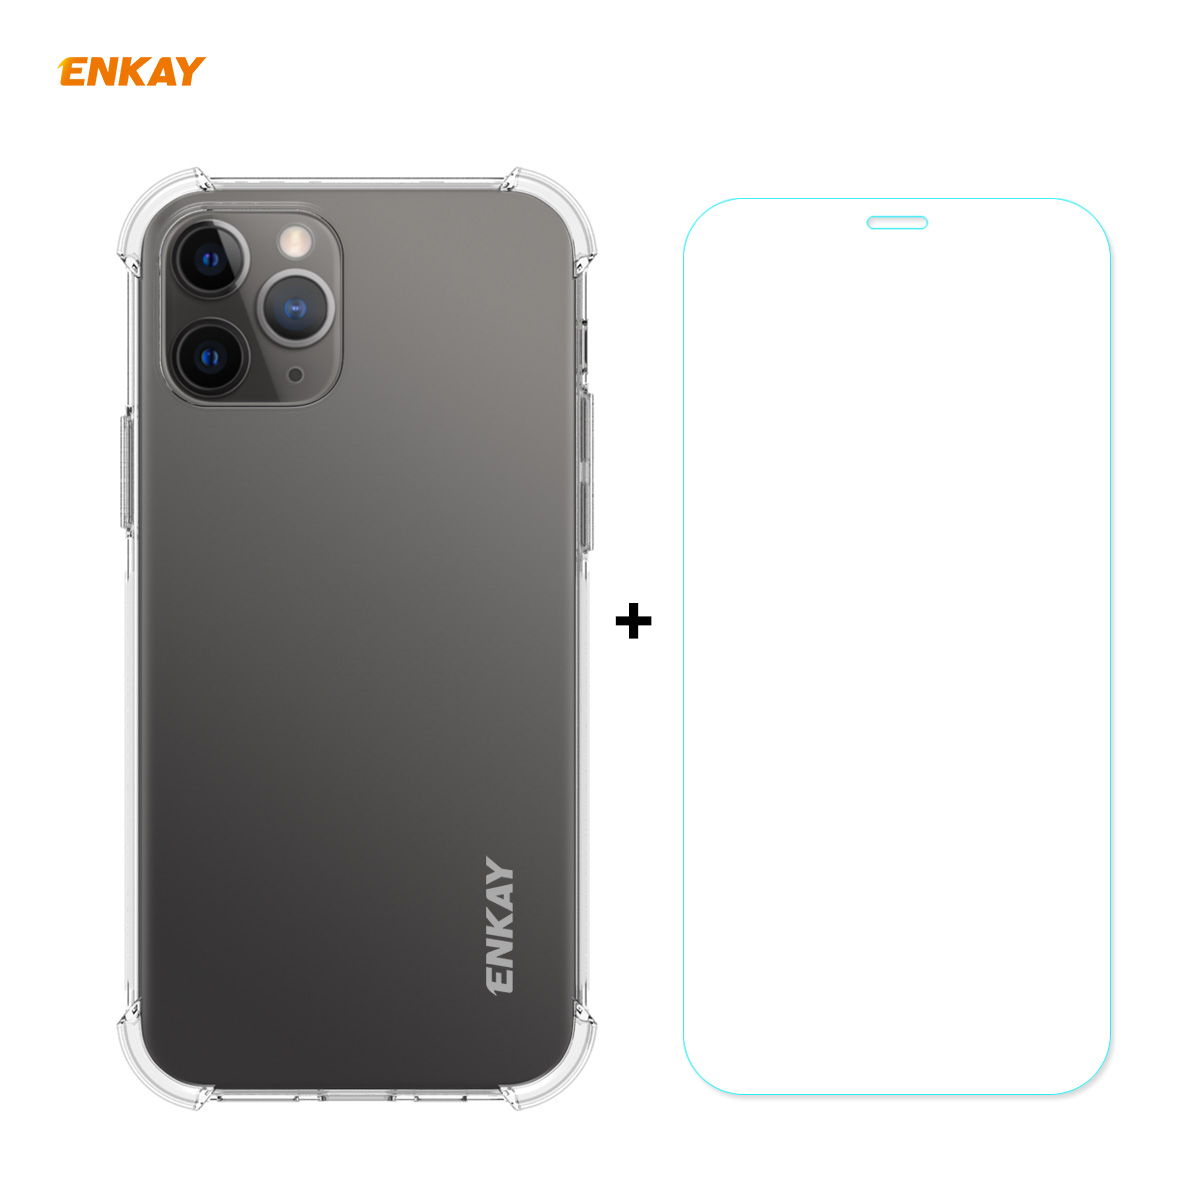 Enkay-2-in-1-for-iPhone-12-Pro--12-Accessories-with-Airbags-Non-Yellow-Transparent-TPU-Protective-Ca-1770210-1